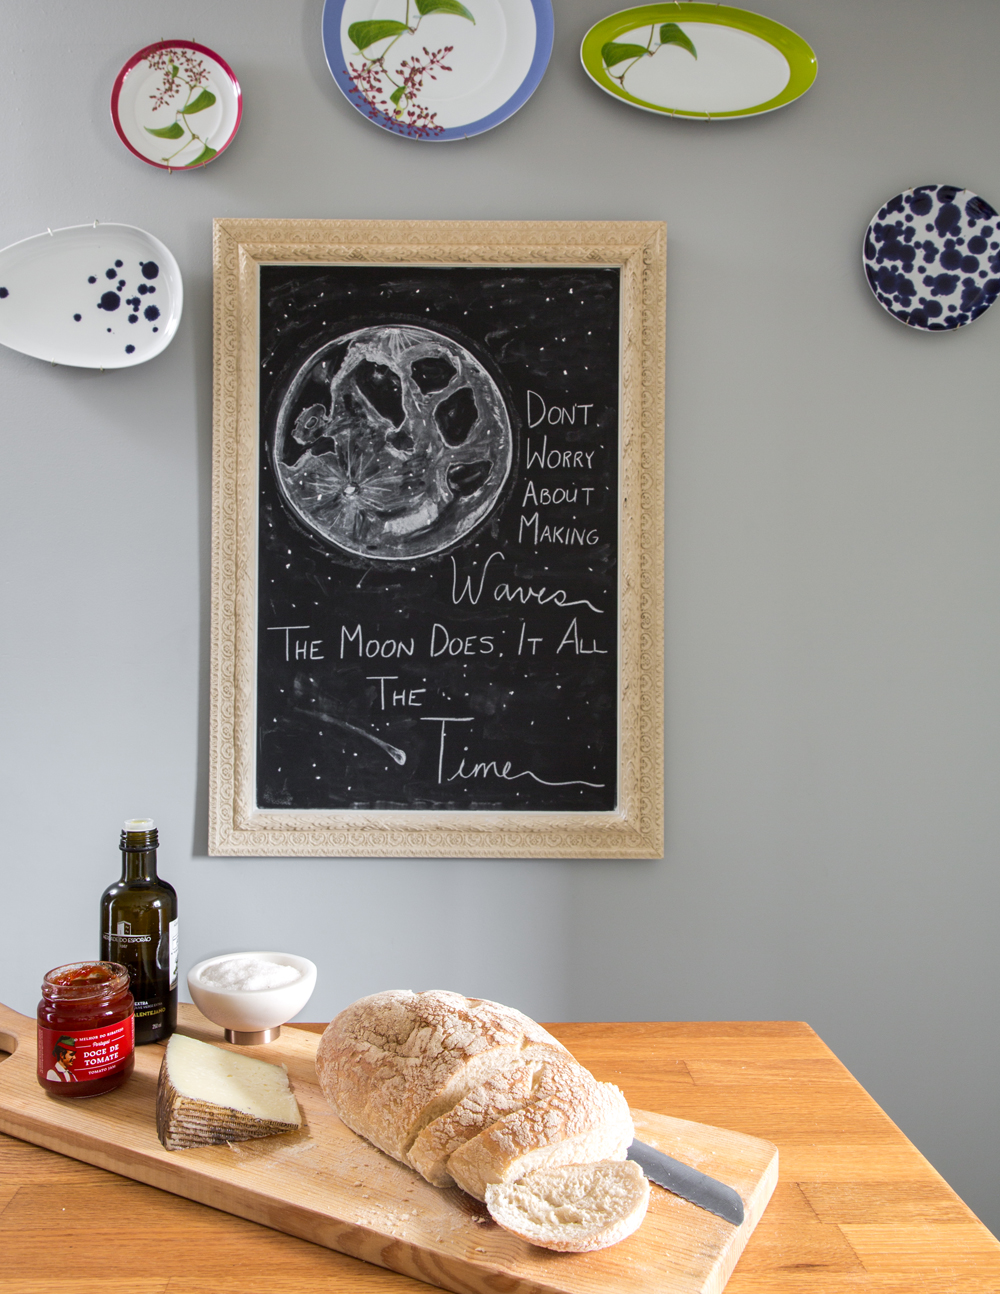 bread and don't worry about making waves message on blackboard